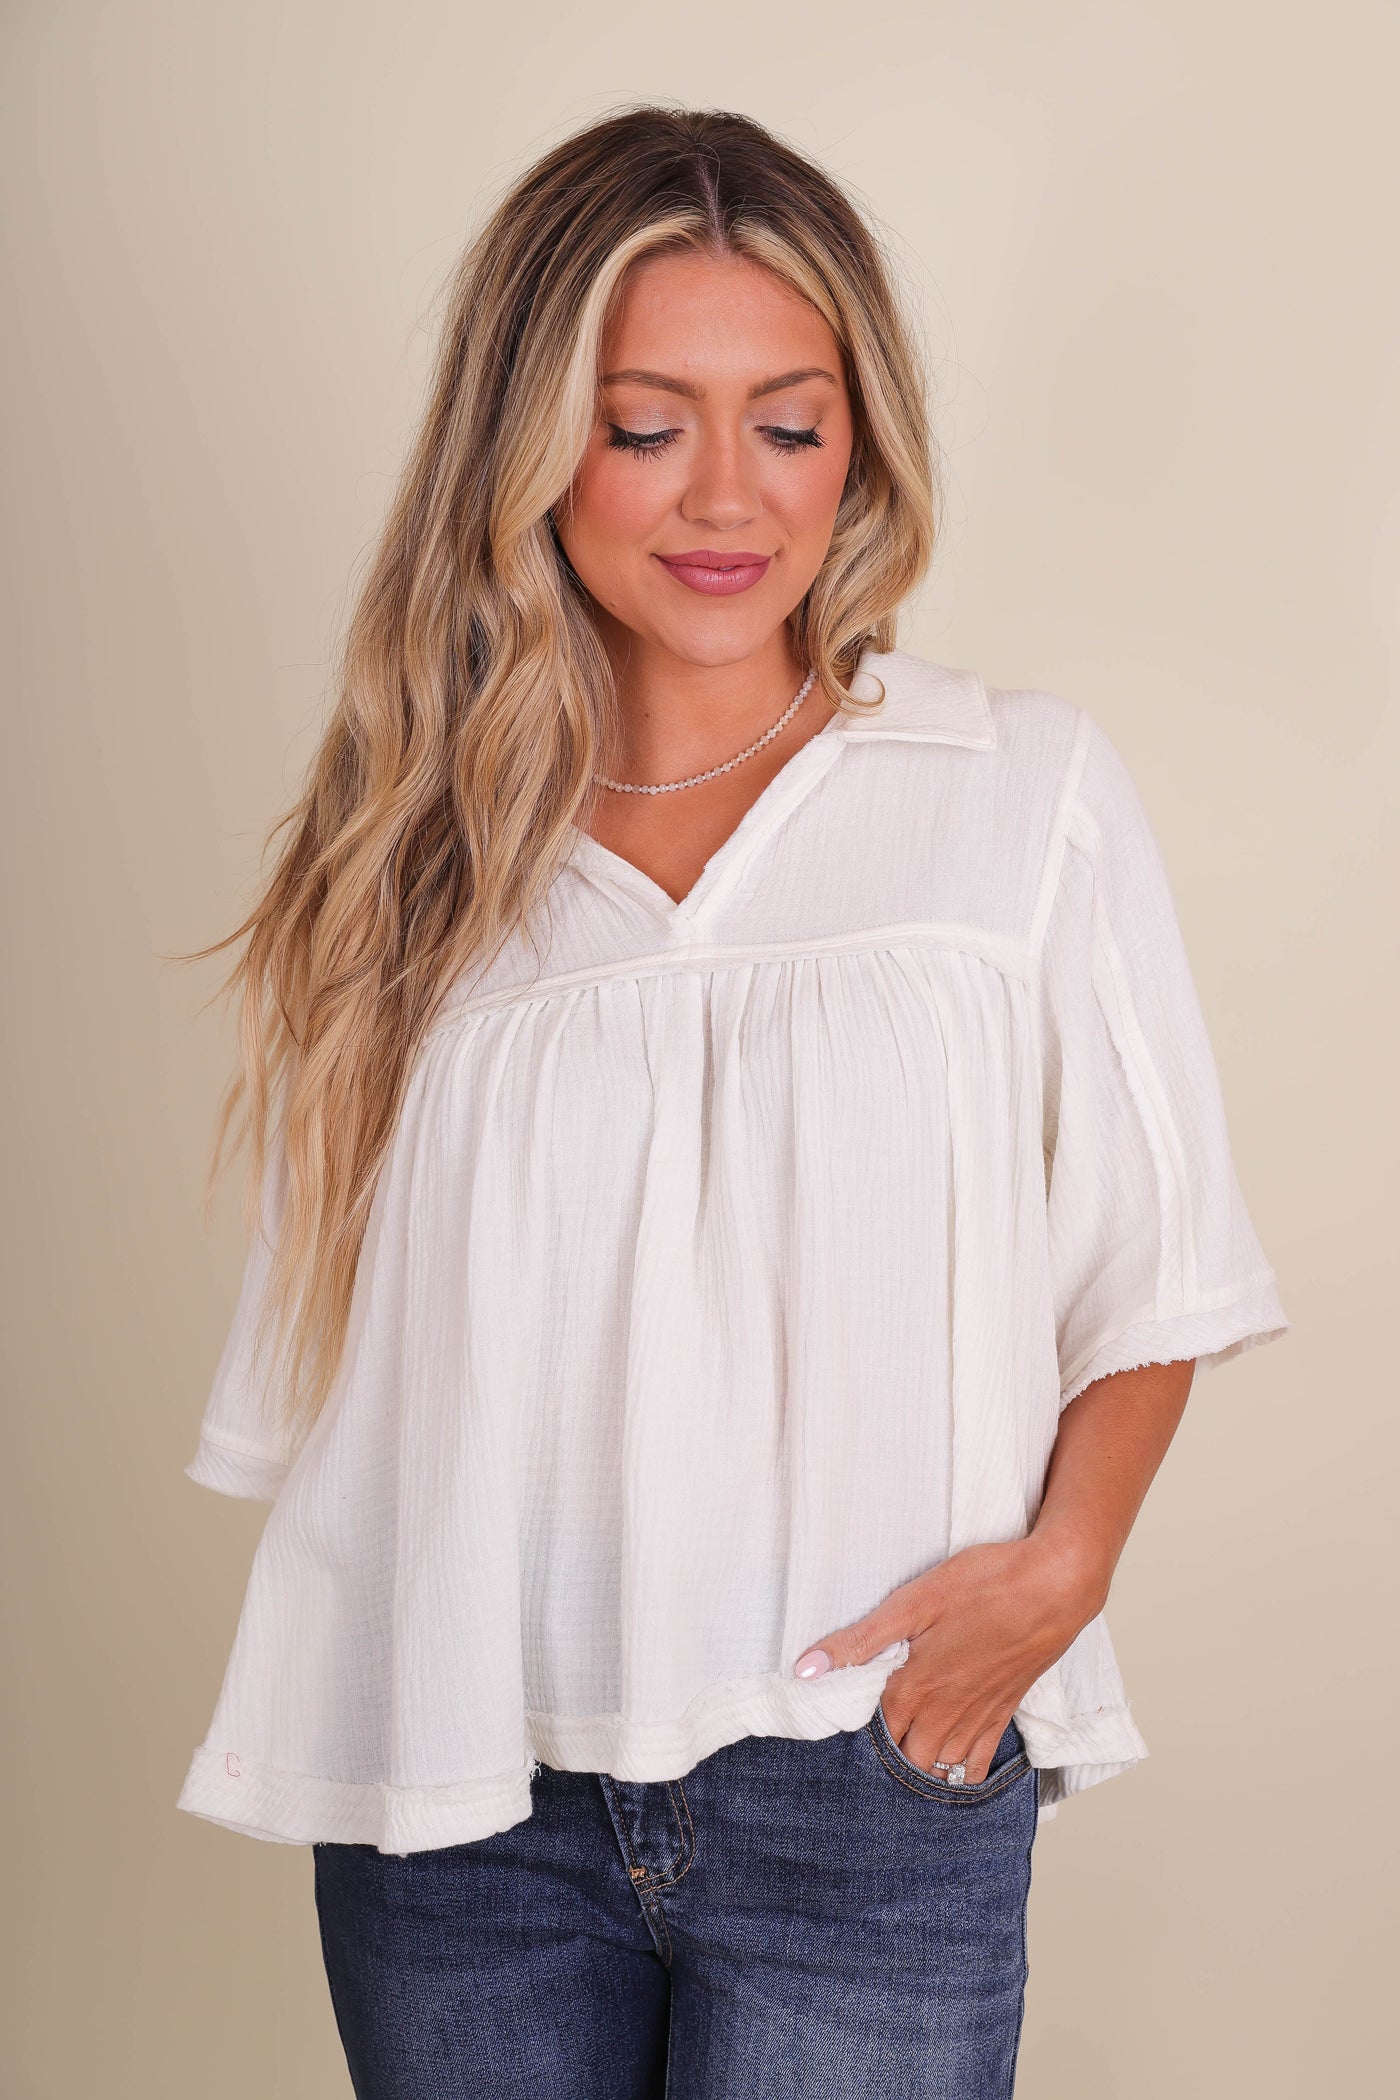 Women's White Cotton Top- Women's Relaxed Cotton Blouse- FreePeople Dupe Top